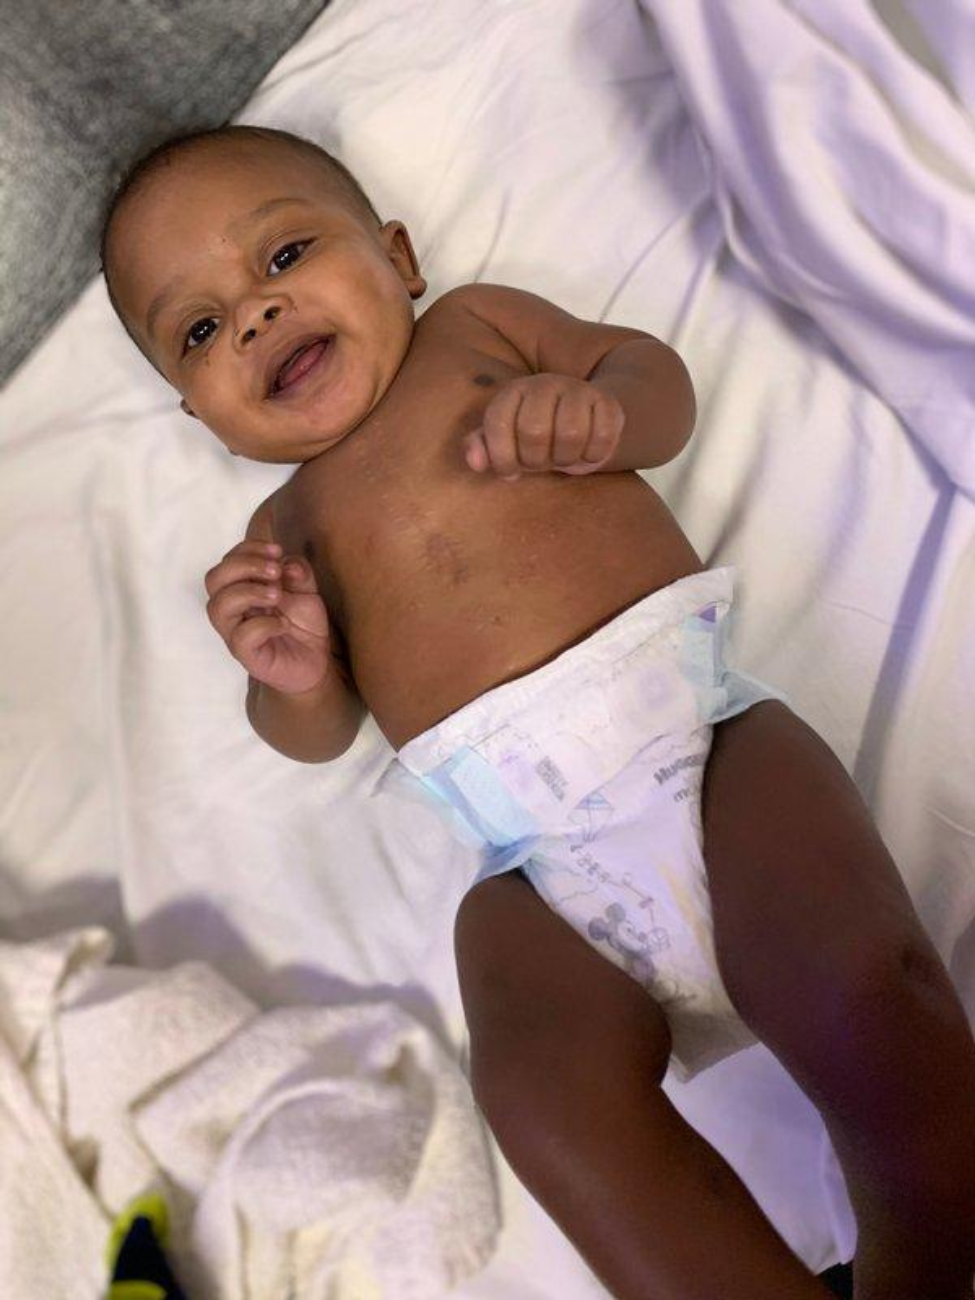 Doctors in his home state didn’t think Imani was old enough to receive the life-saving surgery he needed. (Photo by Amira Carson)